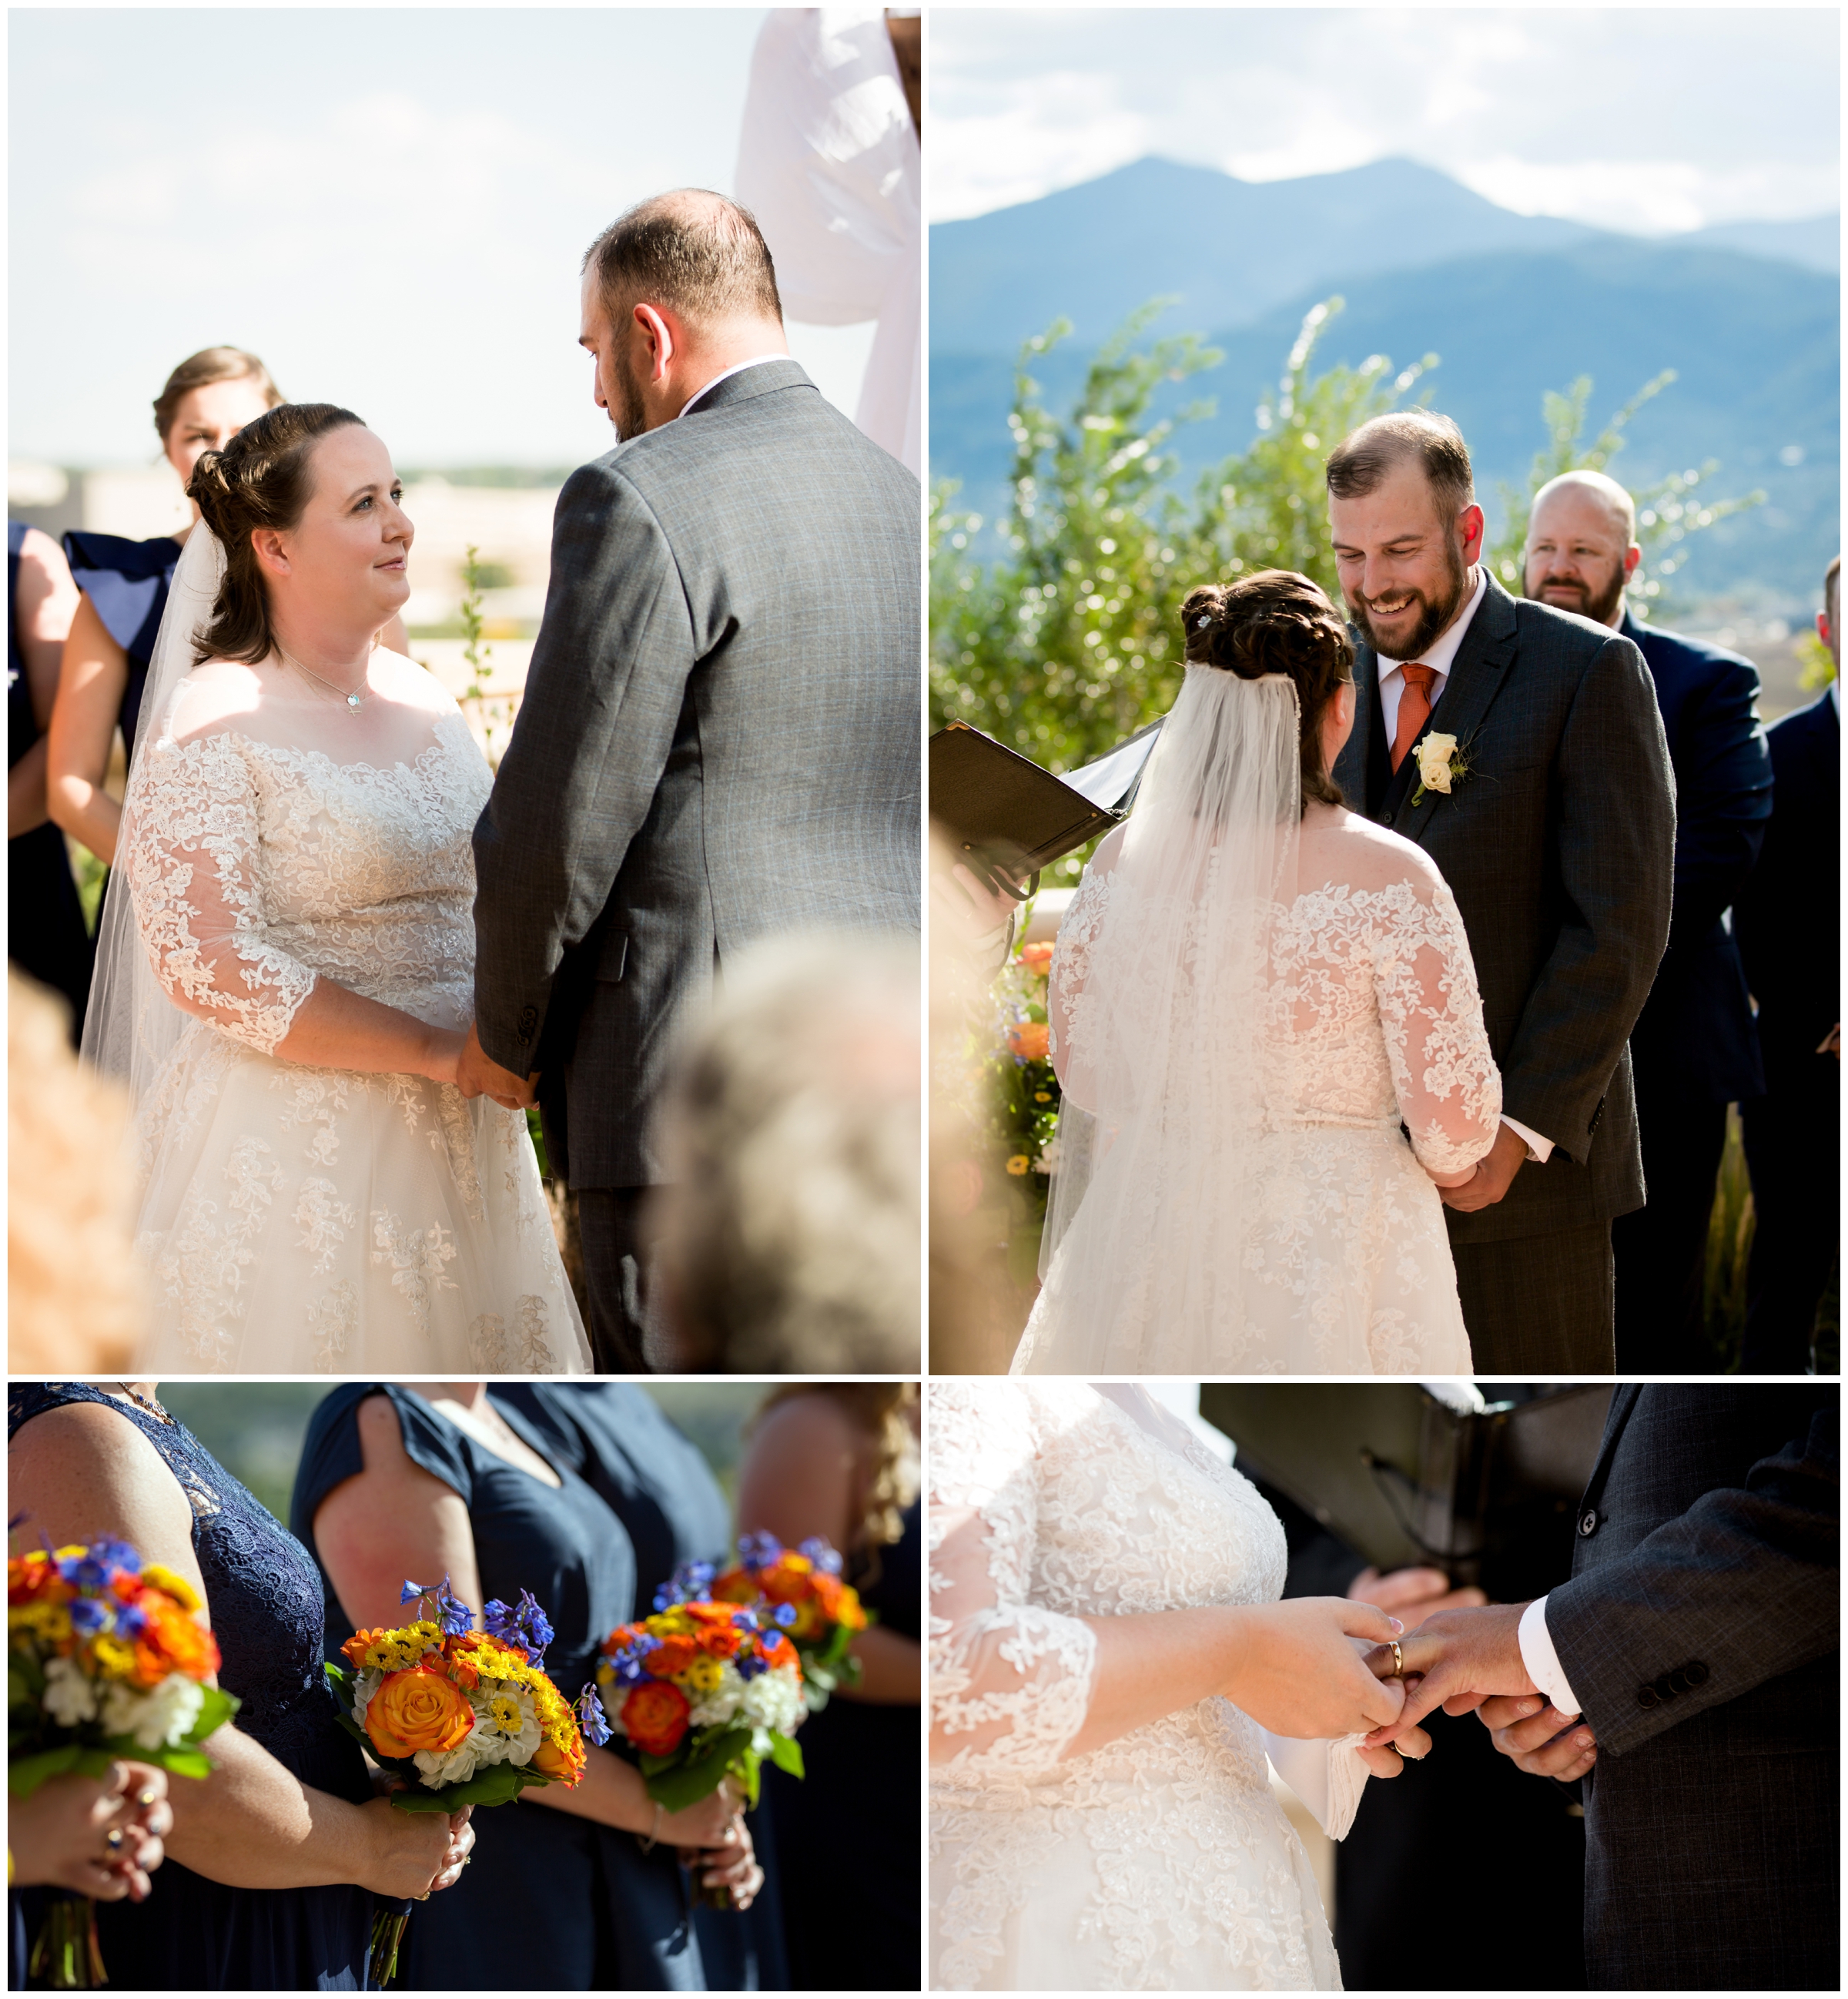 couple saying vows at Pinery Colorado Springs wedding ceremony 